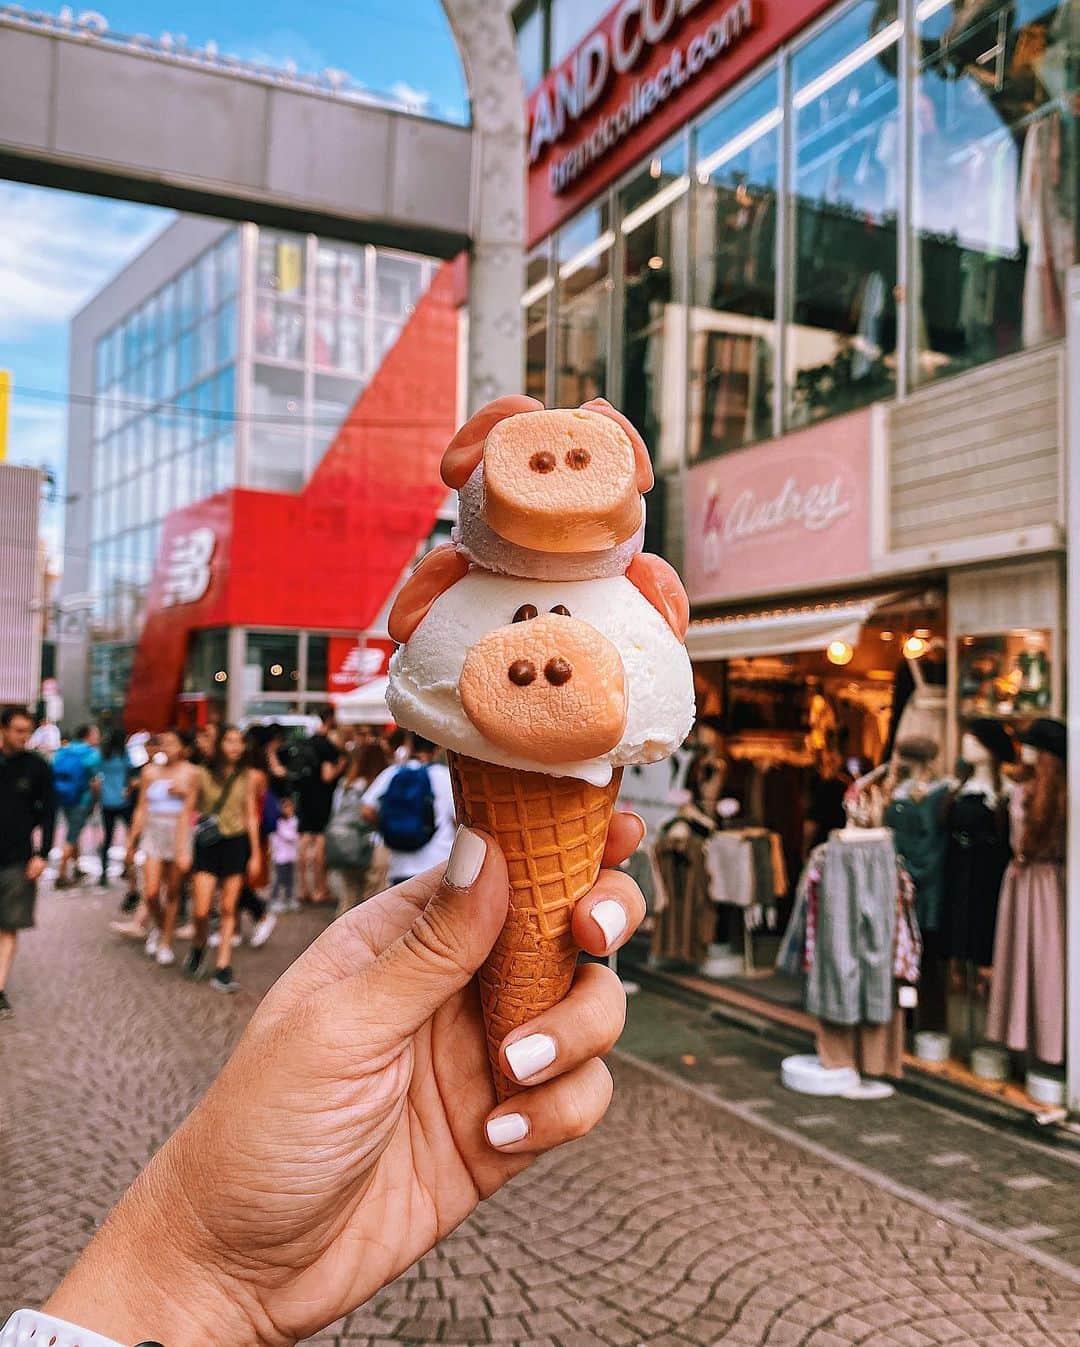 Girleatworldのインスタグラム：「Cute desserts - one of the many reasons I kept going back to Tokyo 🐽🐷🍦 This is the little piggy from Eiswelt Gelato in Harajuku! Aside of little piggy they also have other cute animals ice cream like a chick, bunny and a frog. It's right on Takeshita dori so you really can't miss it.  I've posted up the first two of the series of blog posts I am writing from my most recent Japan trip. The first is an etiquette guide to visiting an onsen (Japanese hot spring pool) and the second one is on the Japanese Alps trek in Kamikochi. Visit to girleatworld.net to read them!  #girleatworld #shotoniPhone #iphone11promax #tokyo #eisweltgelato #littlepiggy #doubutsu #どうぶつえんアイス #どうぶつ」